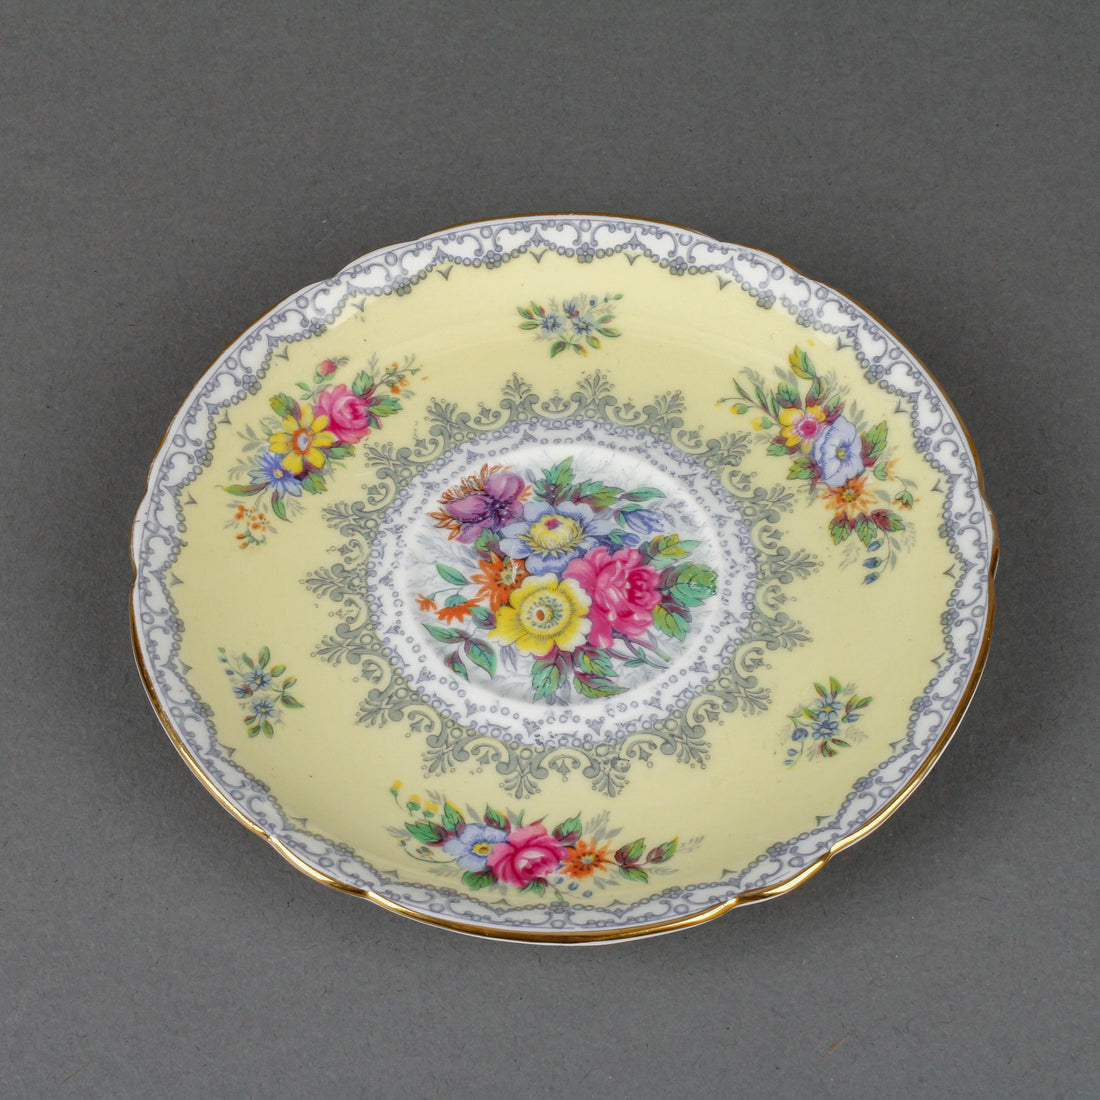 SHELLEY Crochet Hand-Painted Floral Cup & Saucer